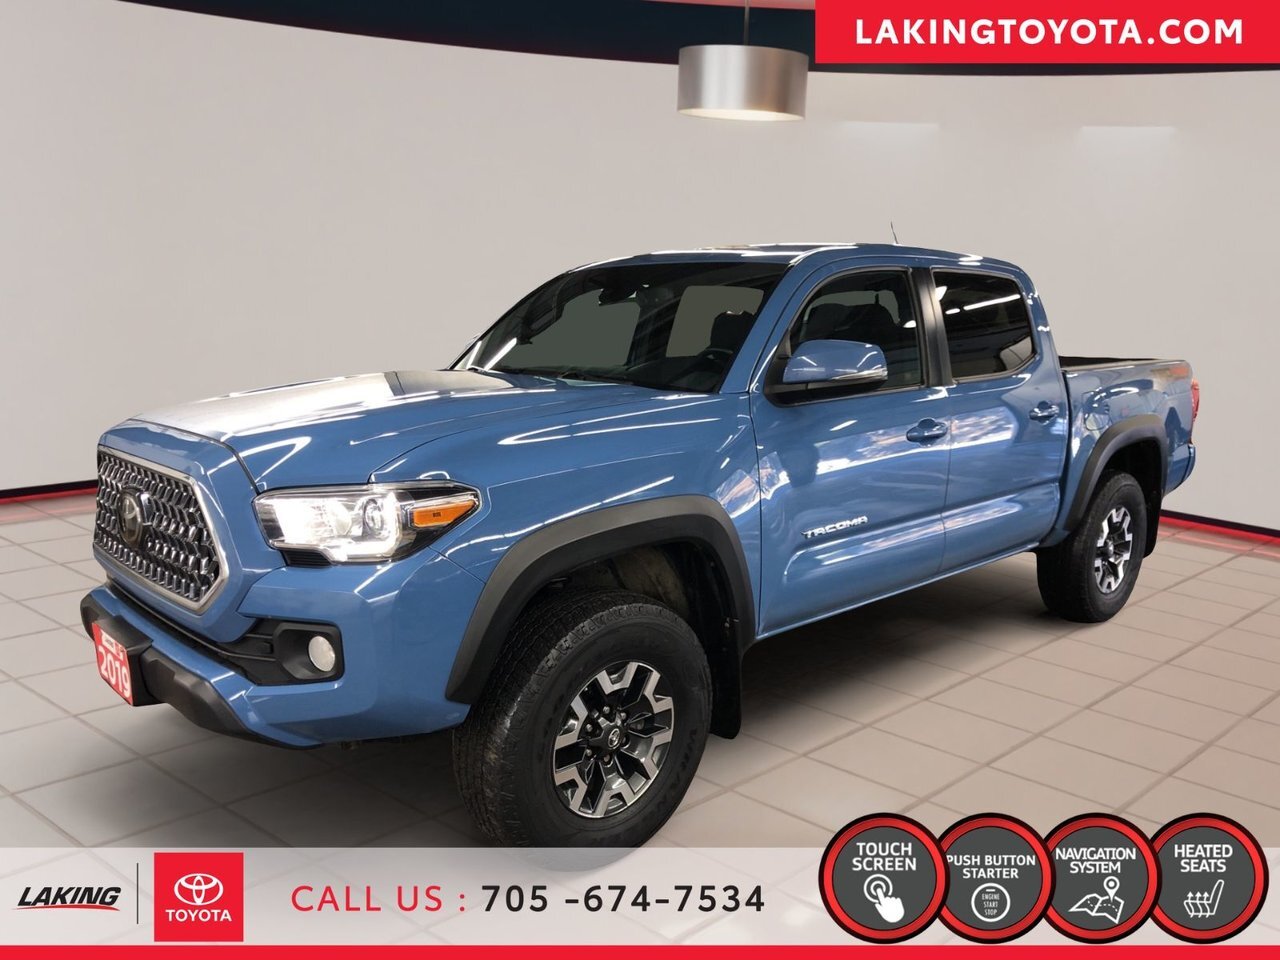 2019 Toyota Tacoma TRD 4X4 OFF-ROAD DOUBLE CAB This Tacoma is Toyota'